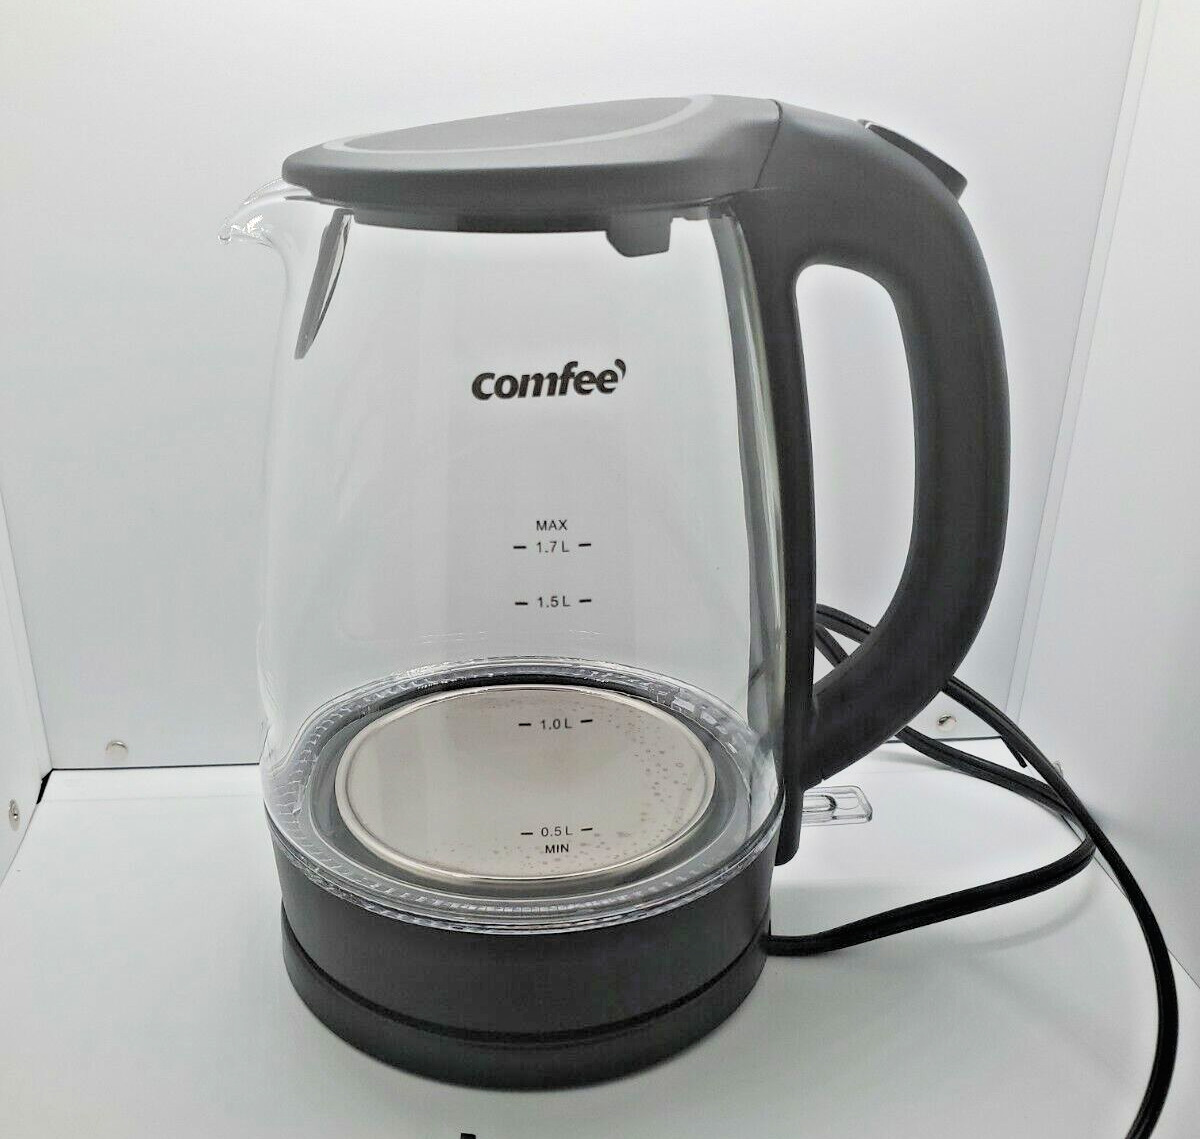  COMFEE' 1.7L Glass Tea Kettle and Kettle Water Boiler - Electric  Kettle Temperature Control with 6 Presets, 2-Hr Keep Warm, Fast Heating,  304 Stainless Steel, Auto-Off and Boil-Dry Protection: Home 